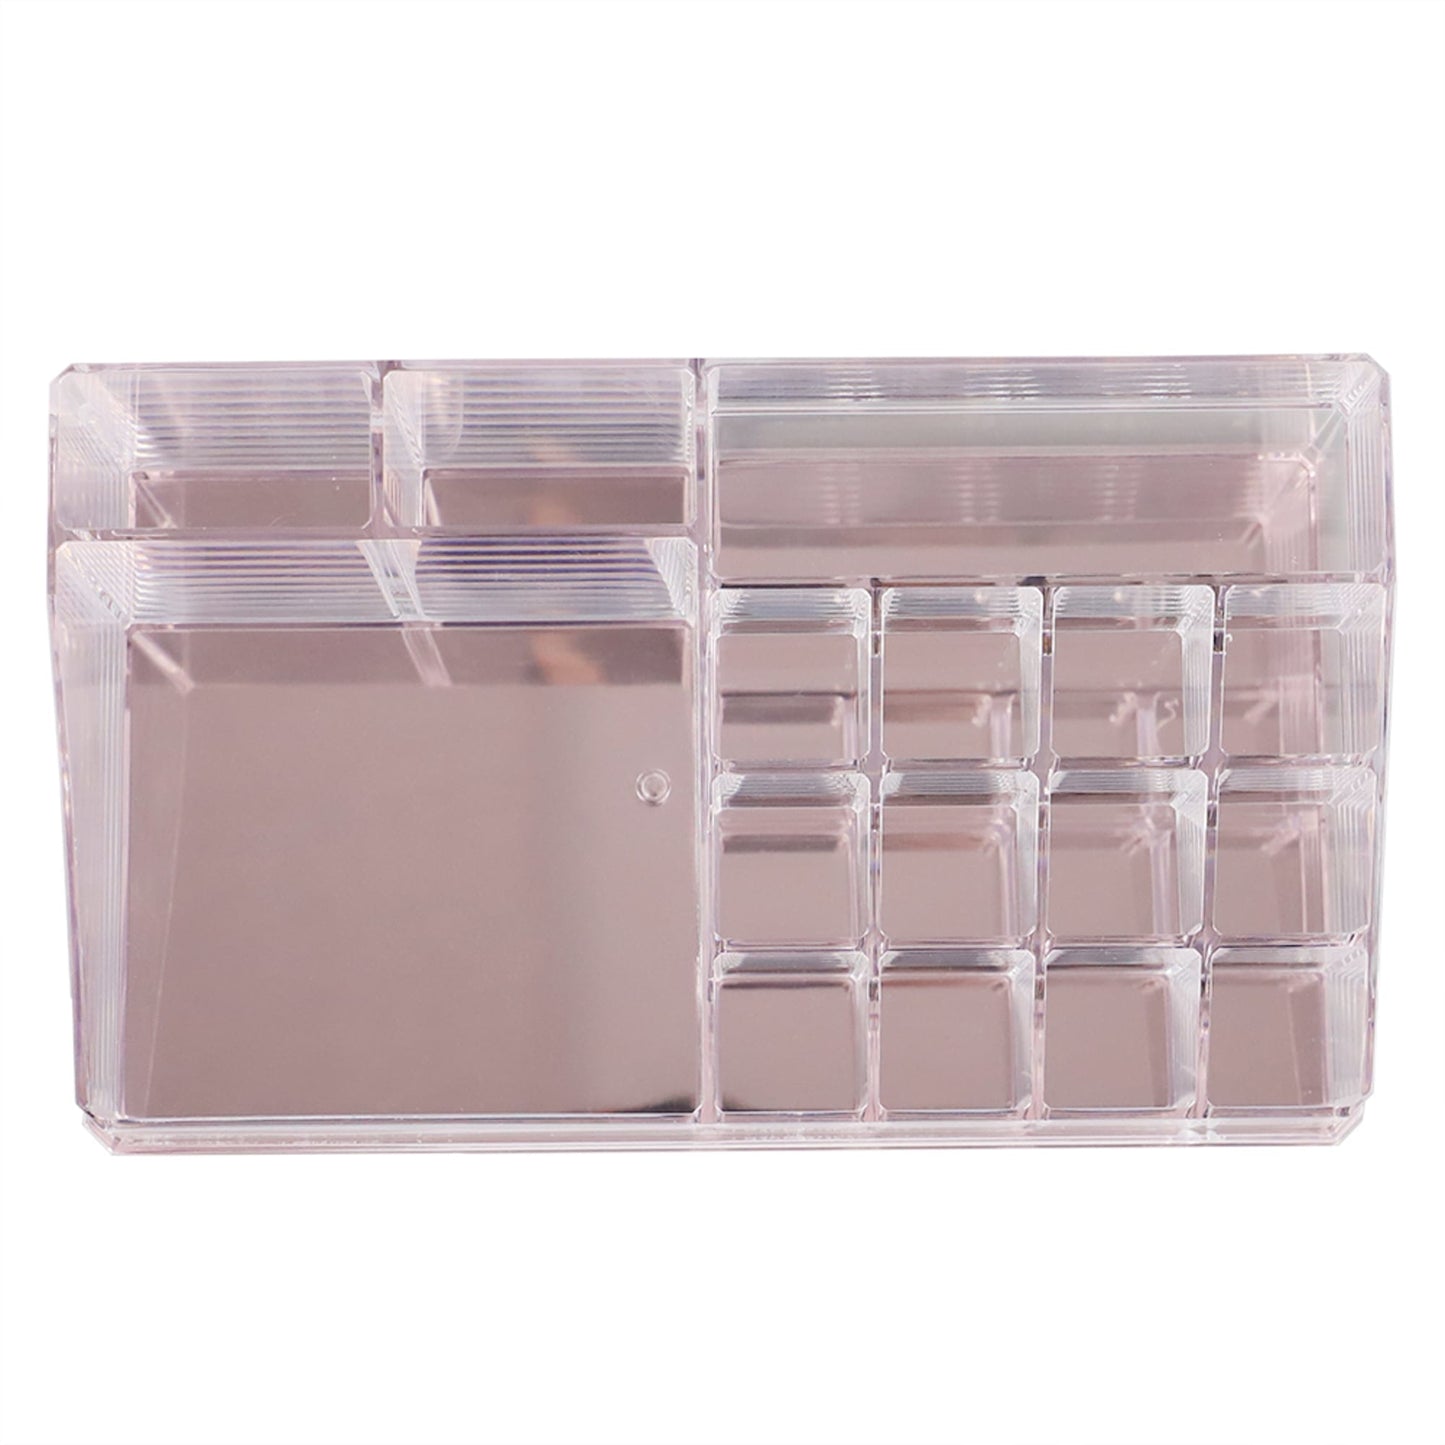 Large 16 Compartment Cosmetic Organizer with Rose Bottom